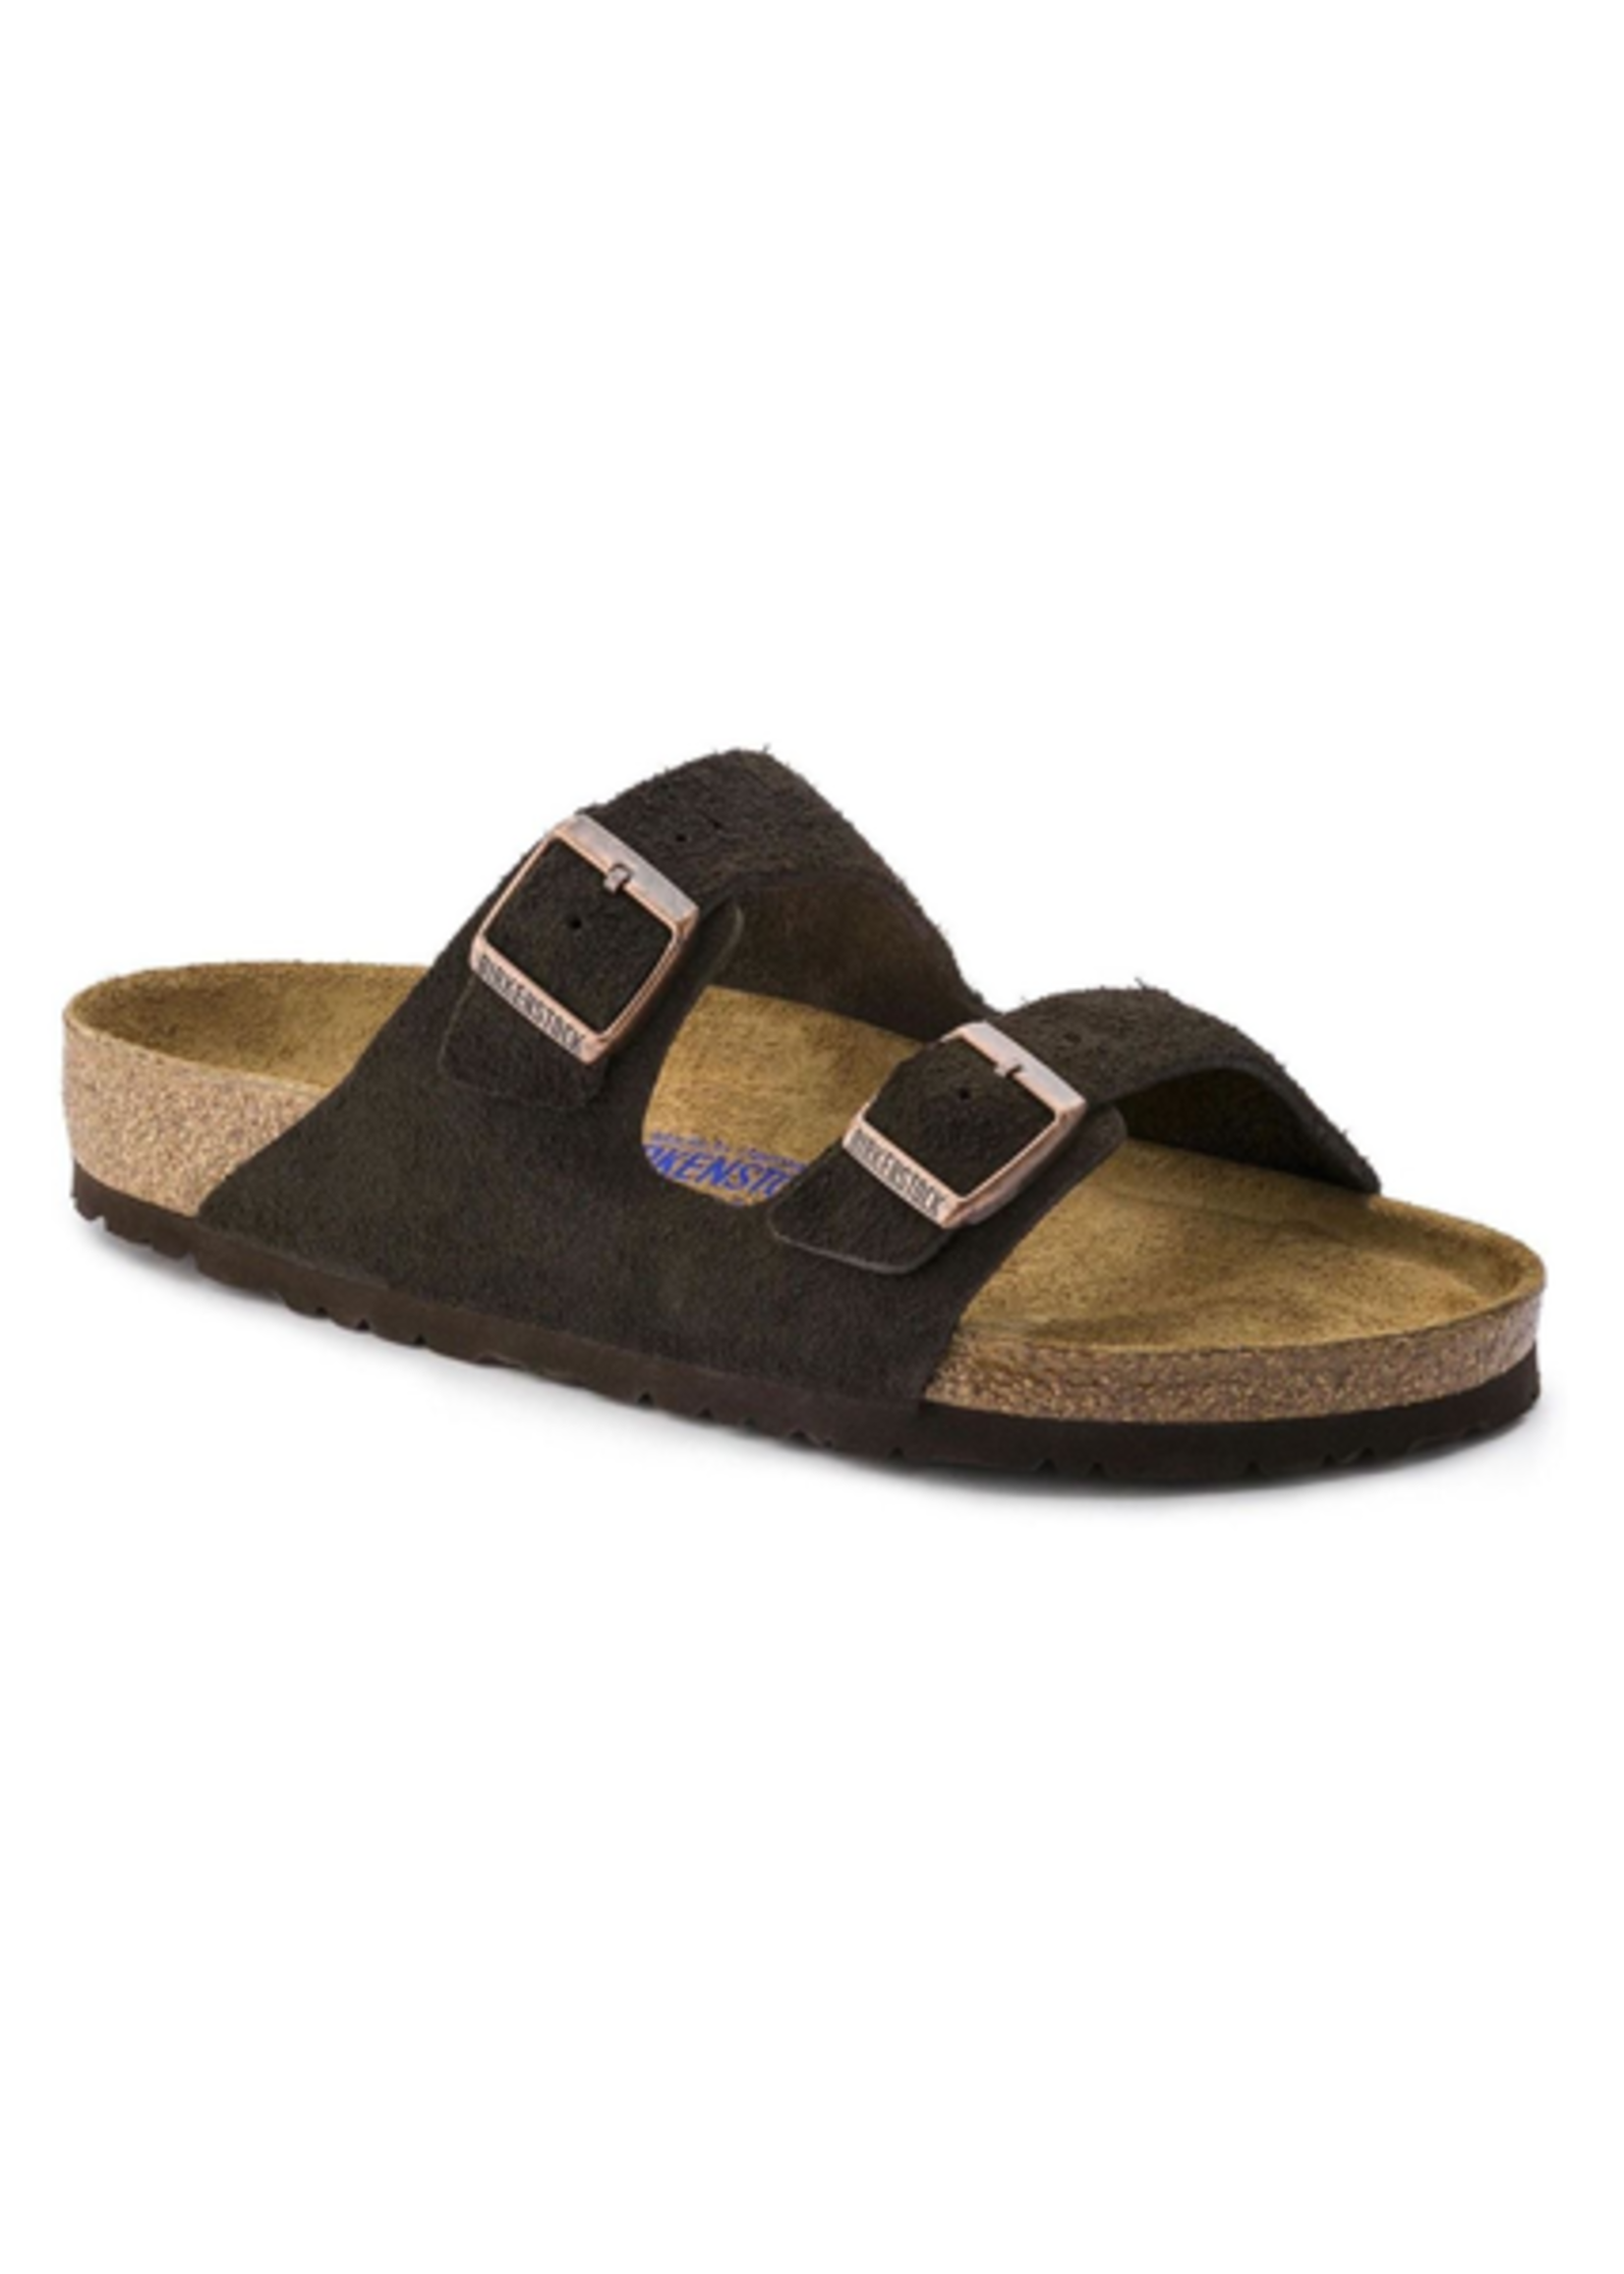 Birkenstock Arizona Suede Leather in Mocca (Soft Footbed - Suede Lined)